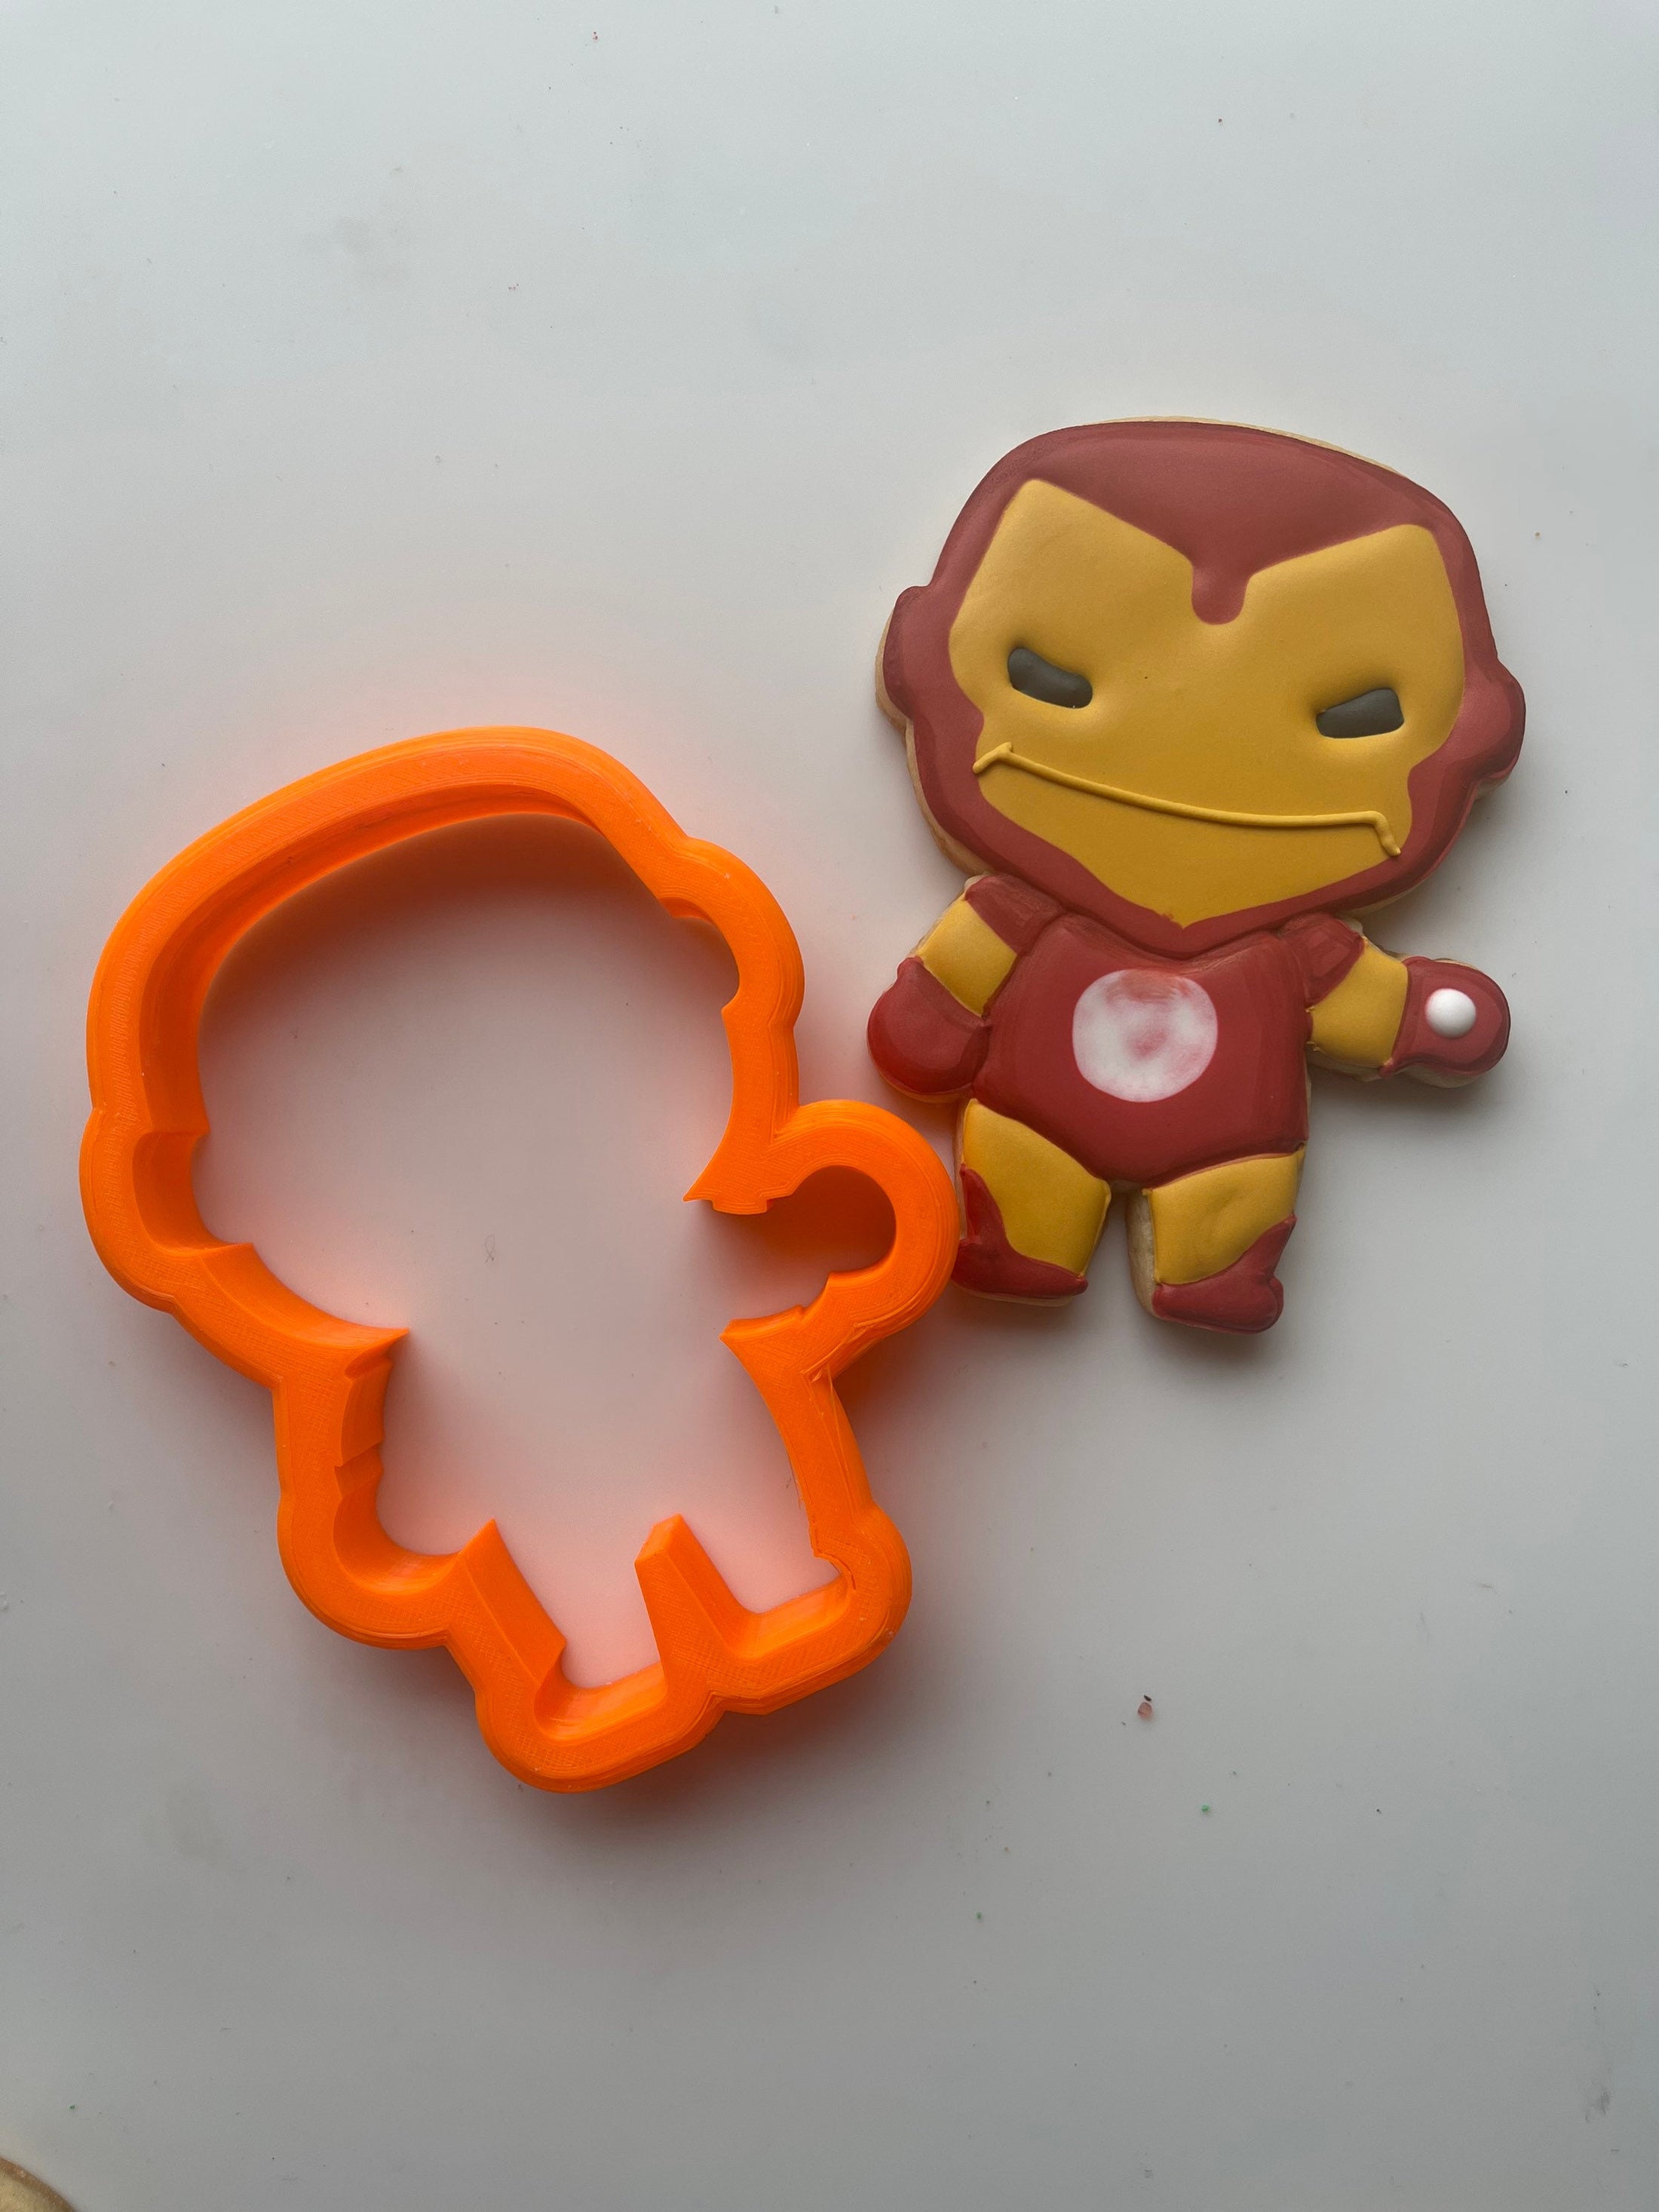 Shop Now: Your Favorite Super Heroes as Cookie Cutters